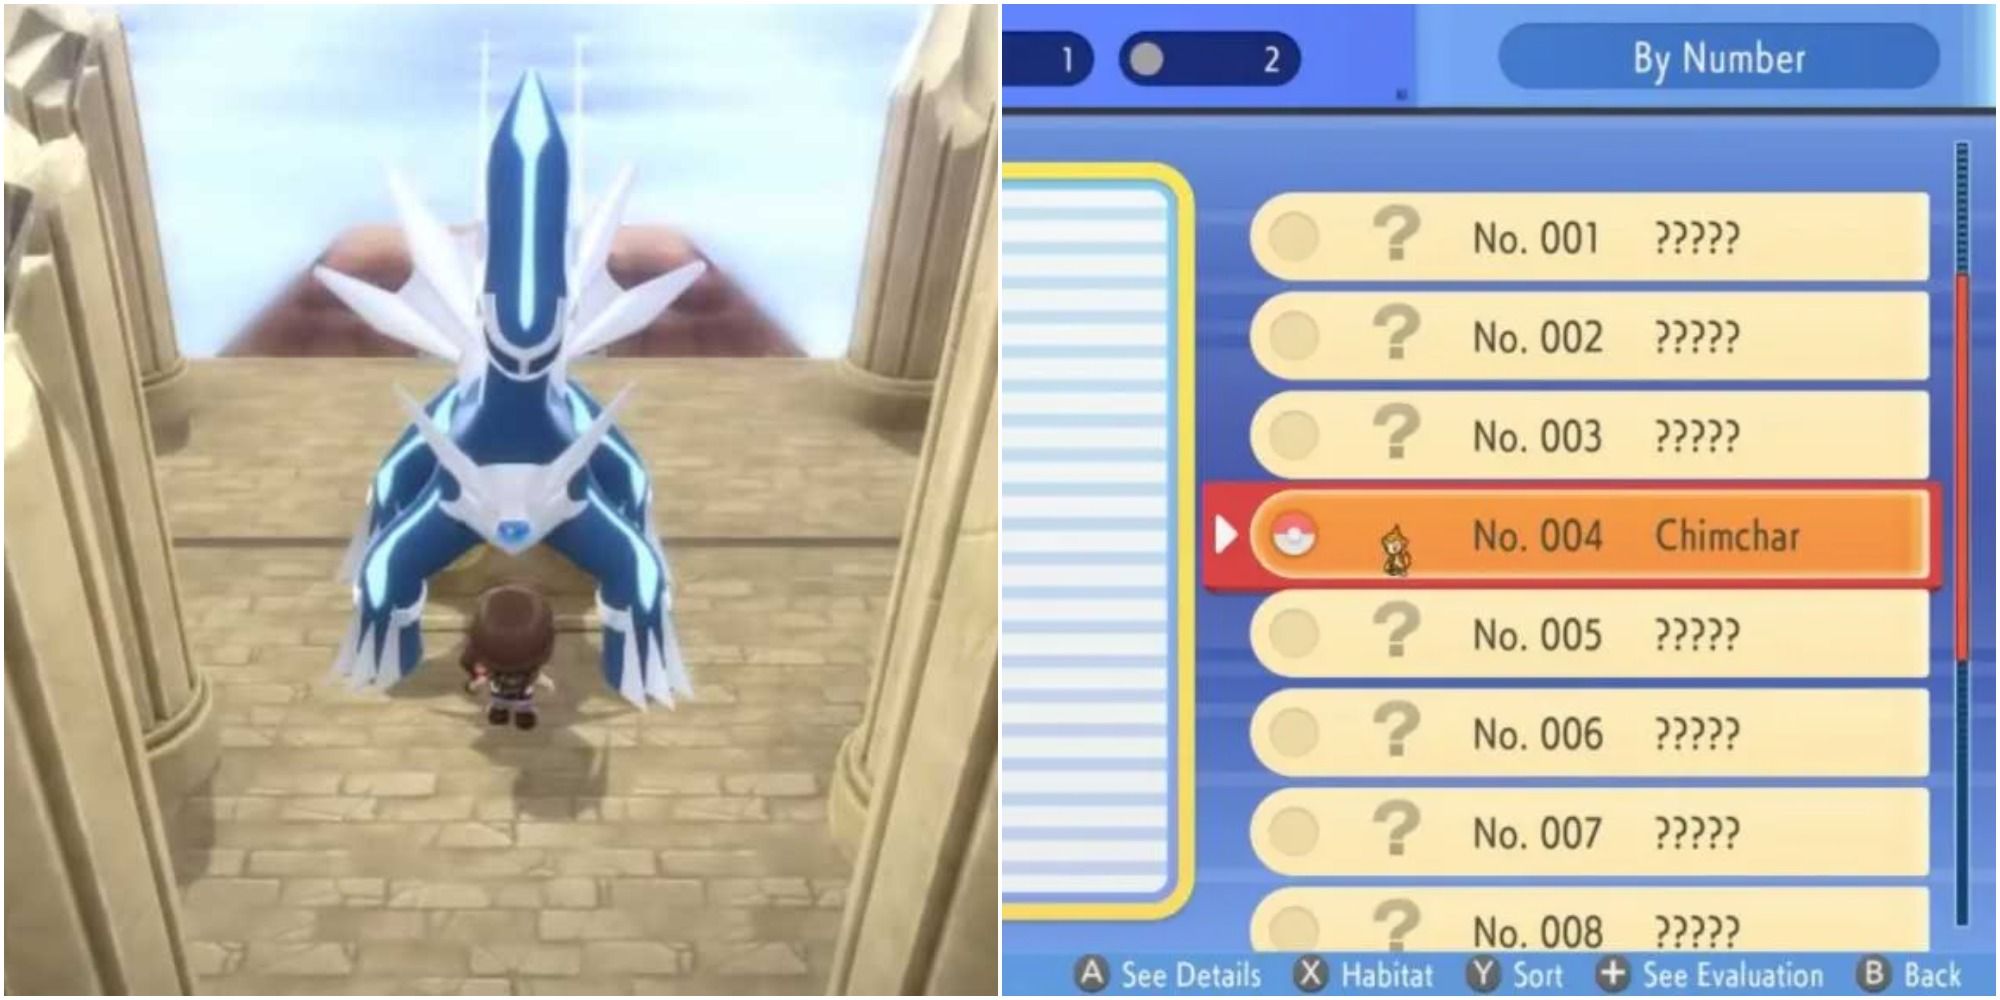 What happens with SEEN & CAUGHT National Dex in Pokemon Brilliant Diamond  Shining Pearl 